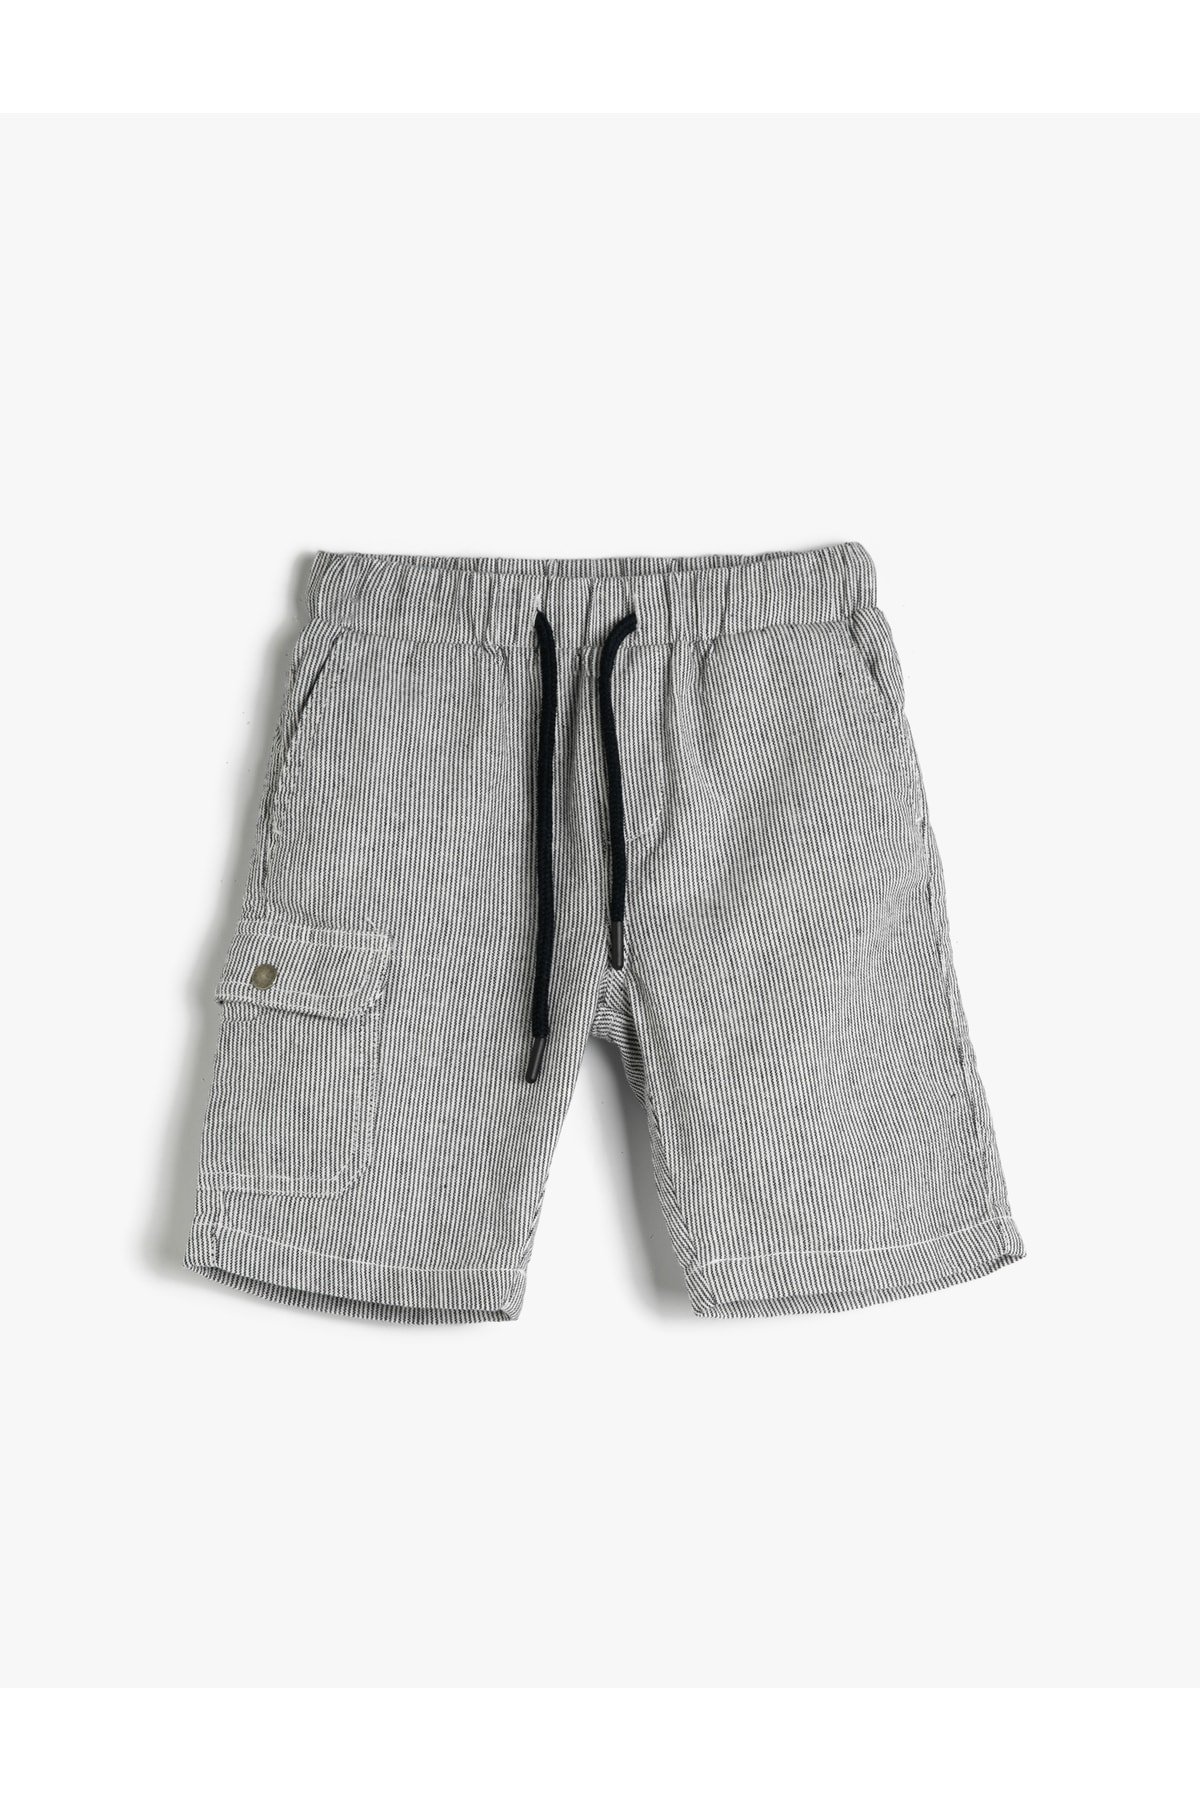 Koton Shorts with Tie Waist Pocket Detail on the Side.